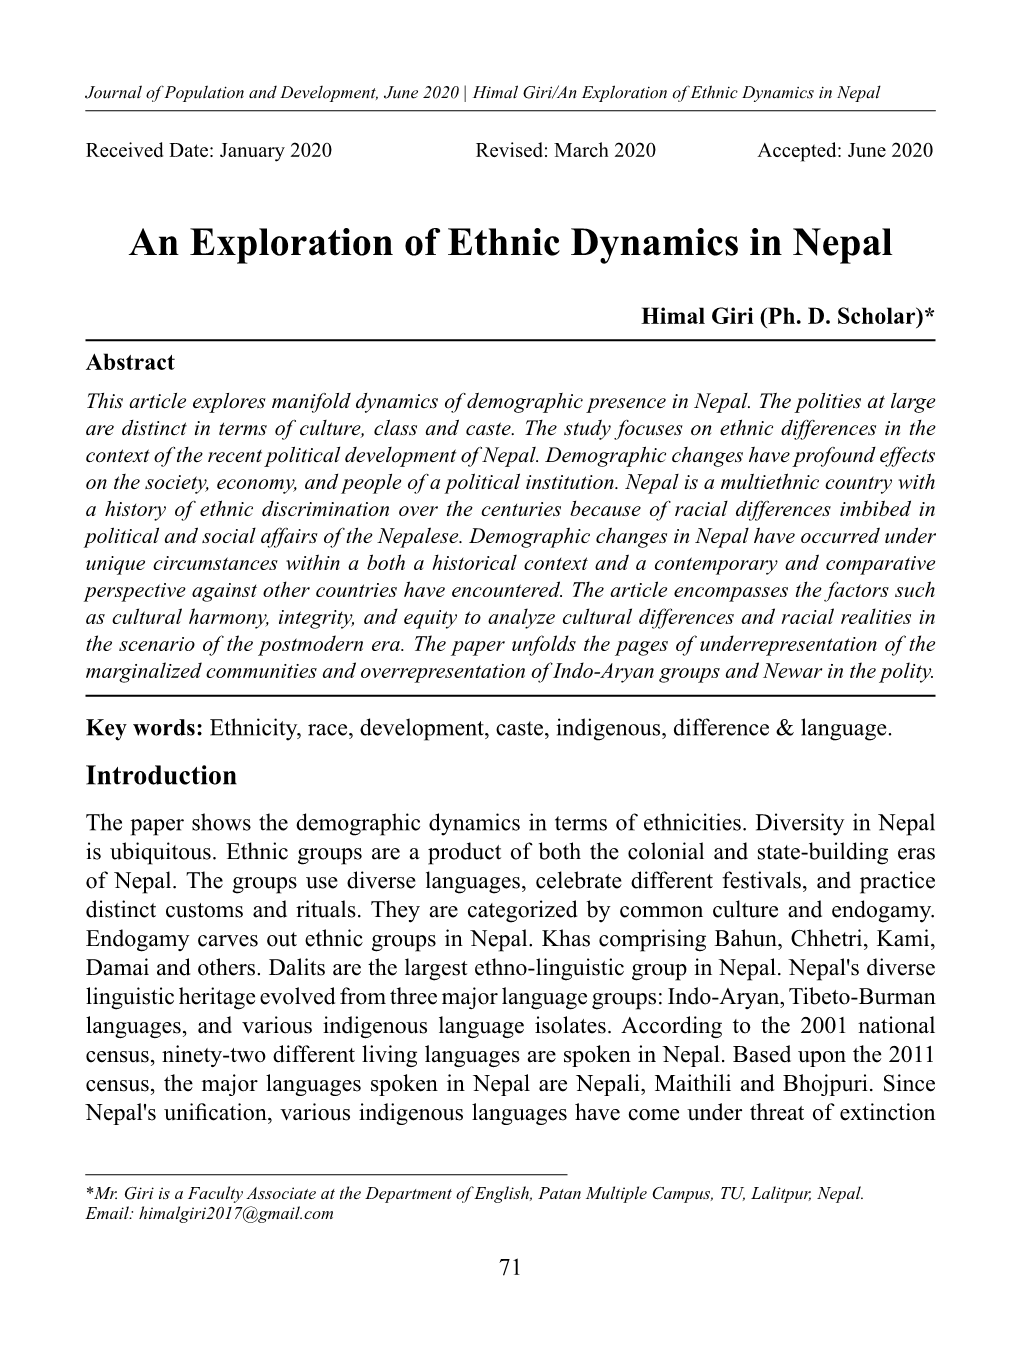 An Exploration of Ethnic Dynamics in Nepal